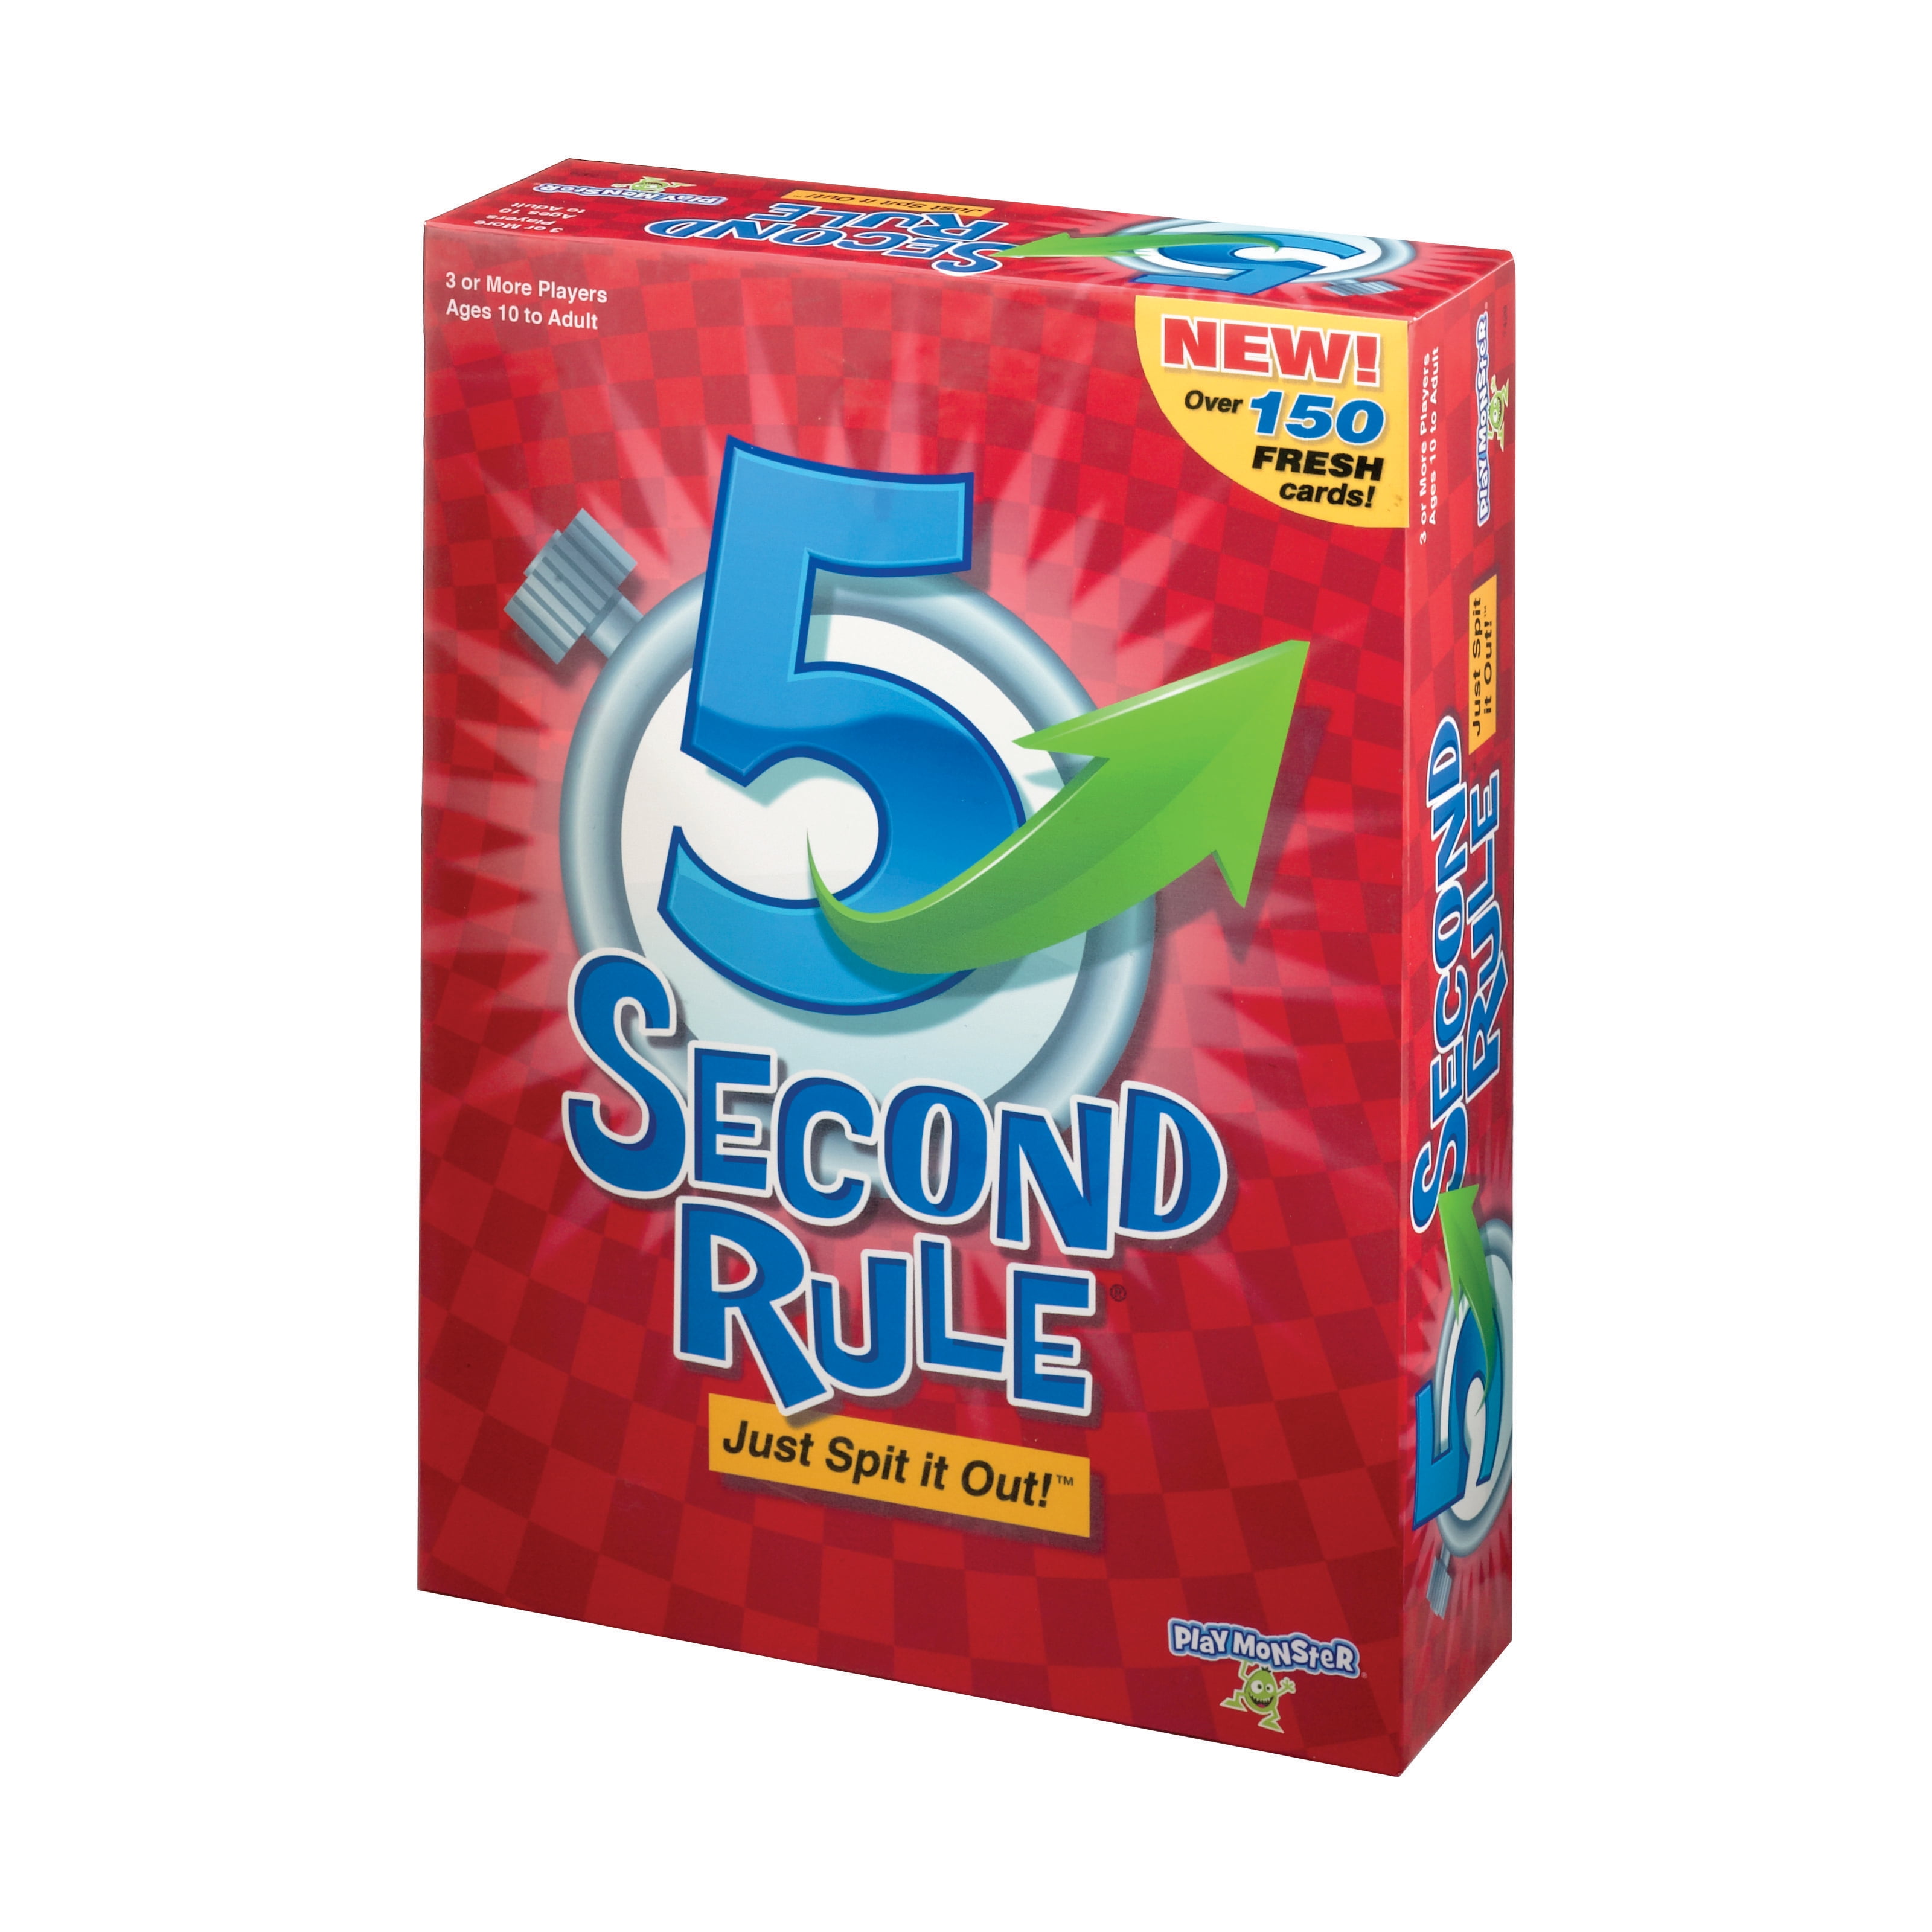 PlayMonster 5 Second Rule Just Spit It Out Card Game